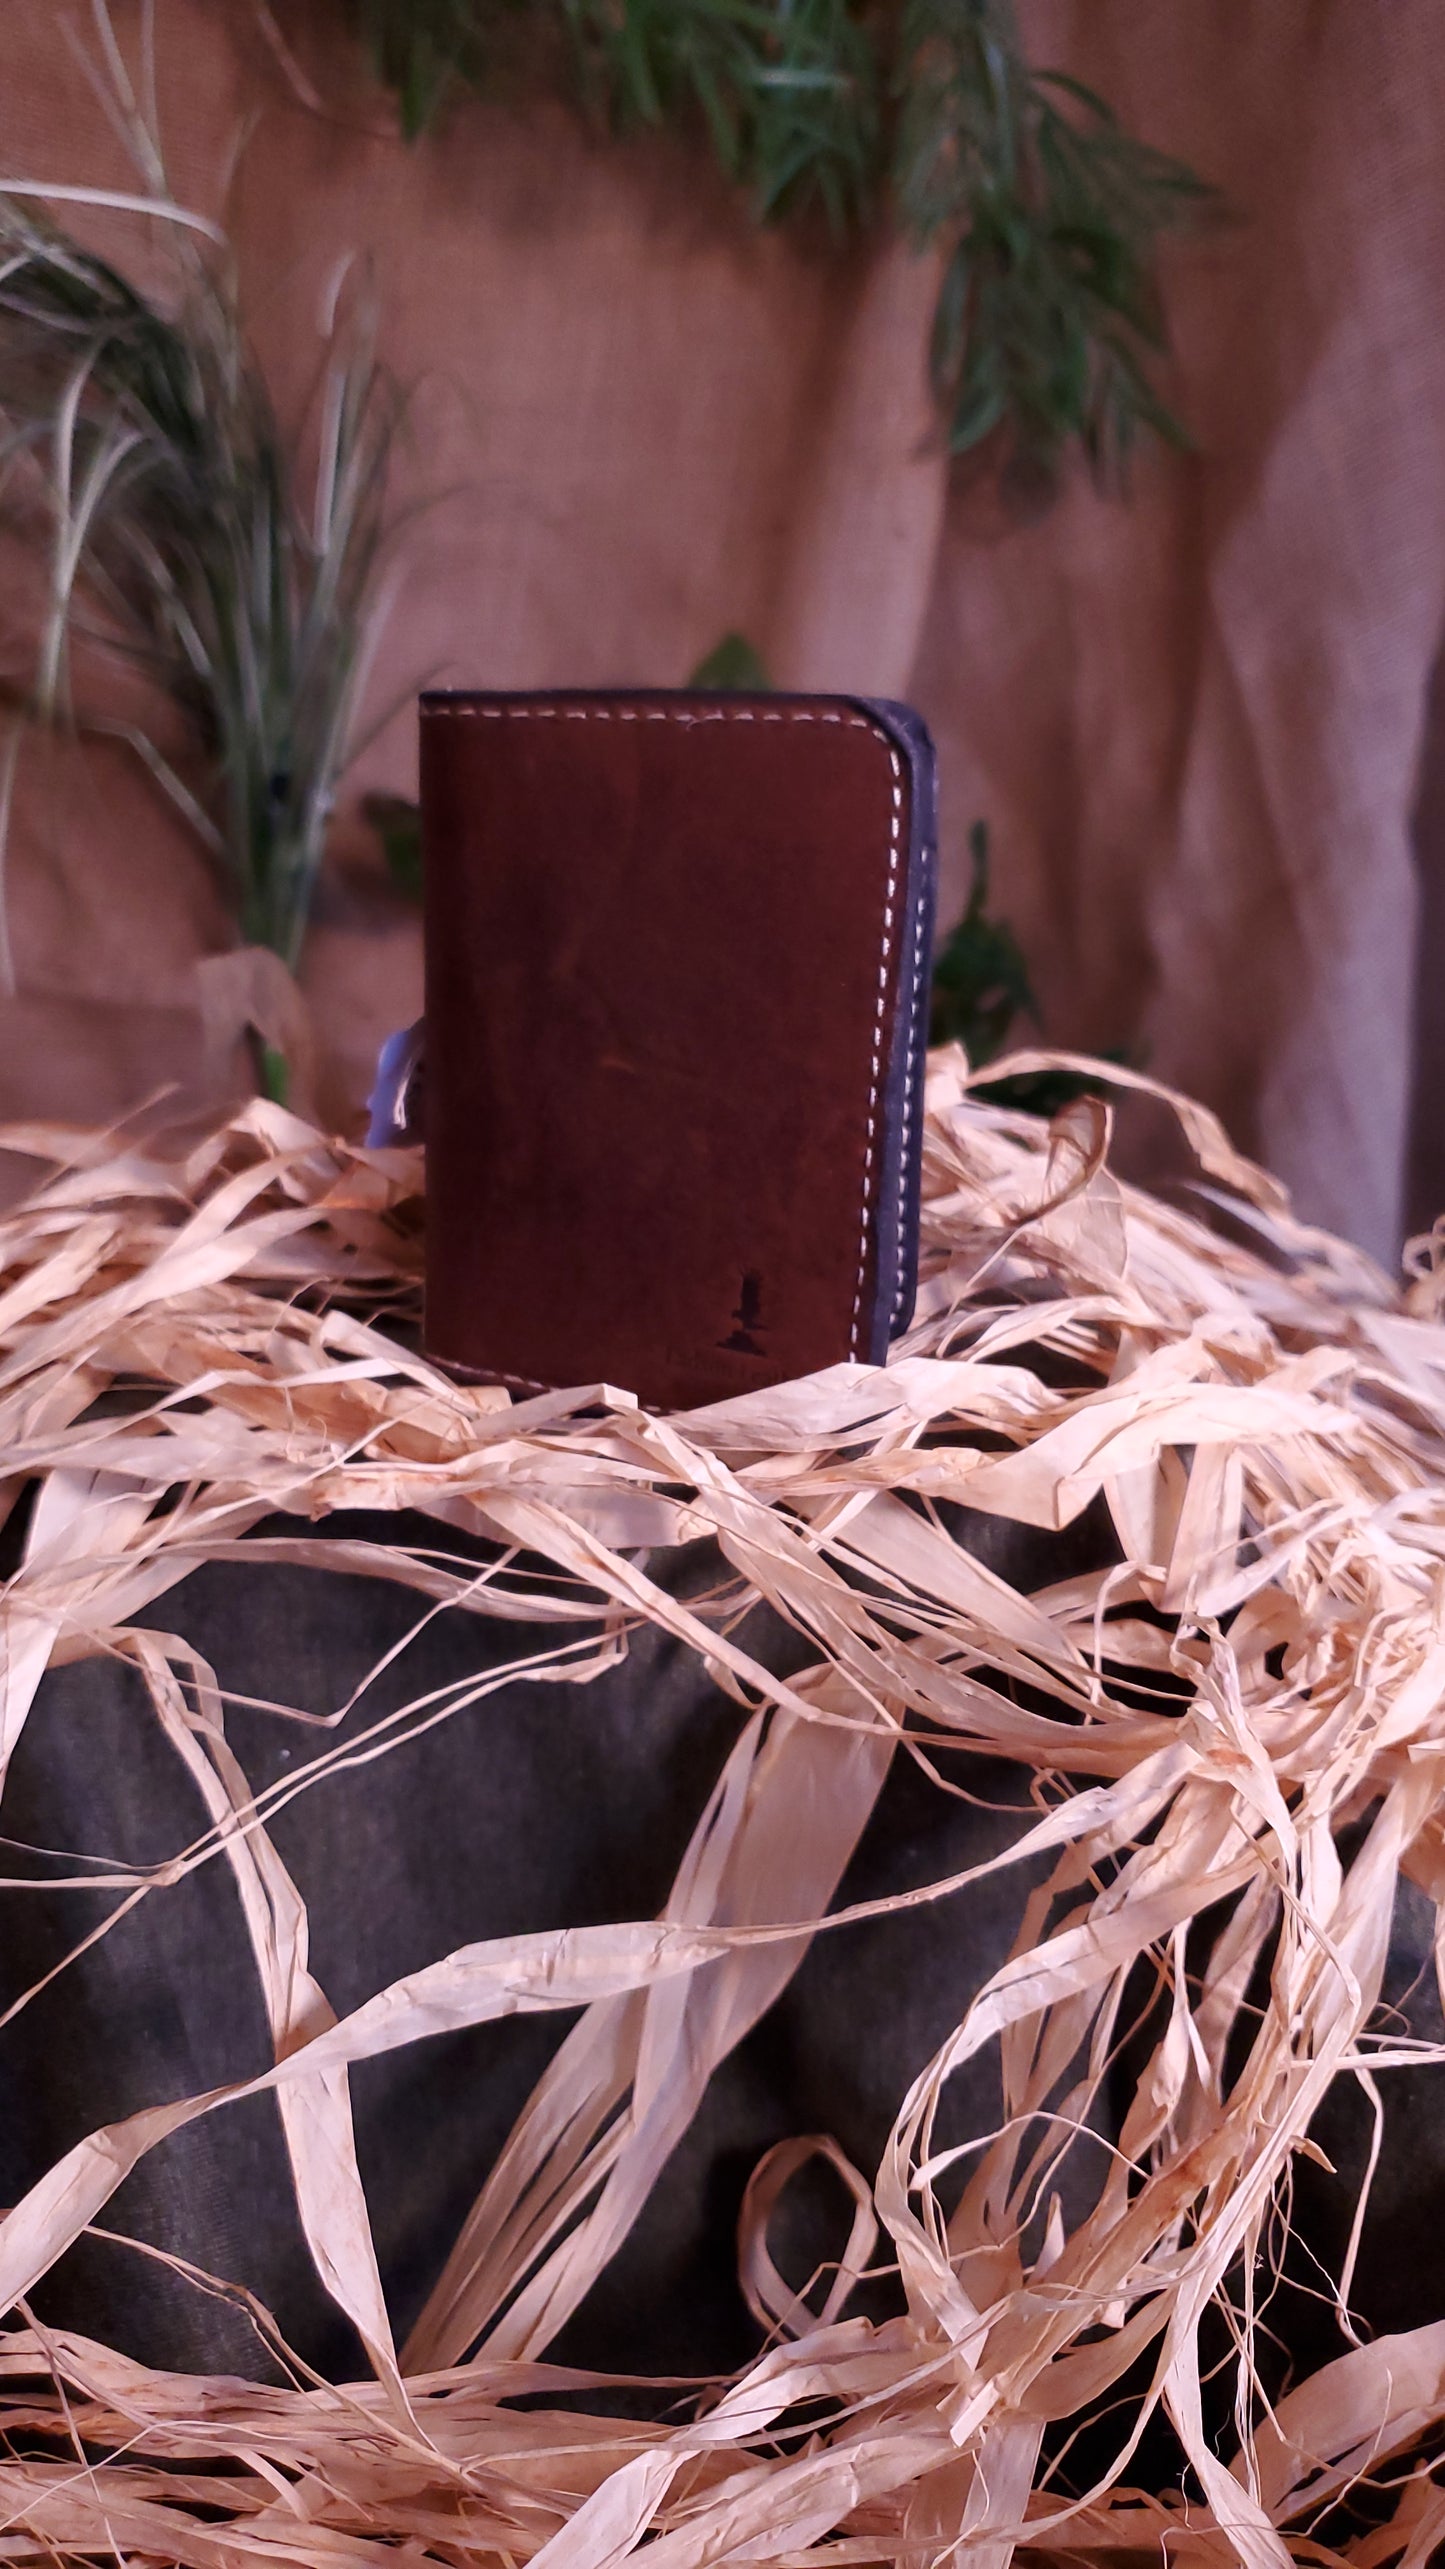 Bifold wallet in a rich brown color and cream colored stitching